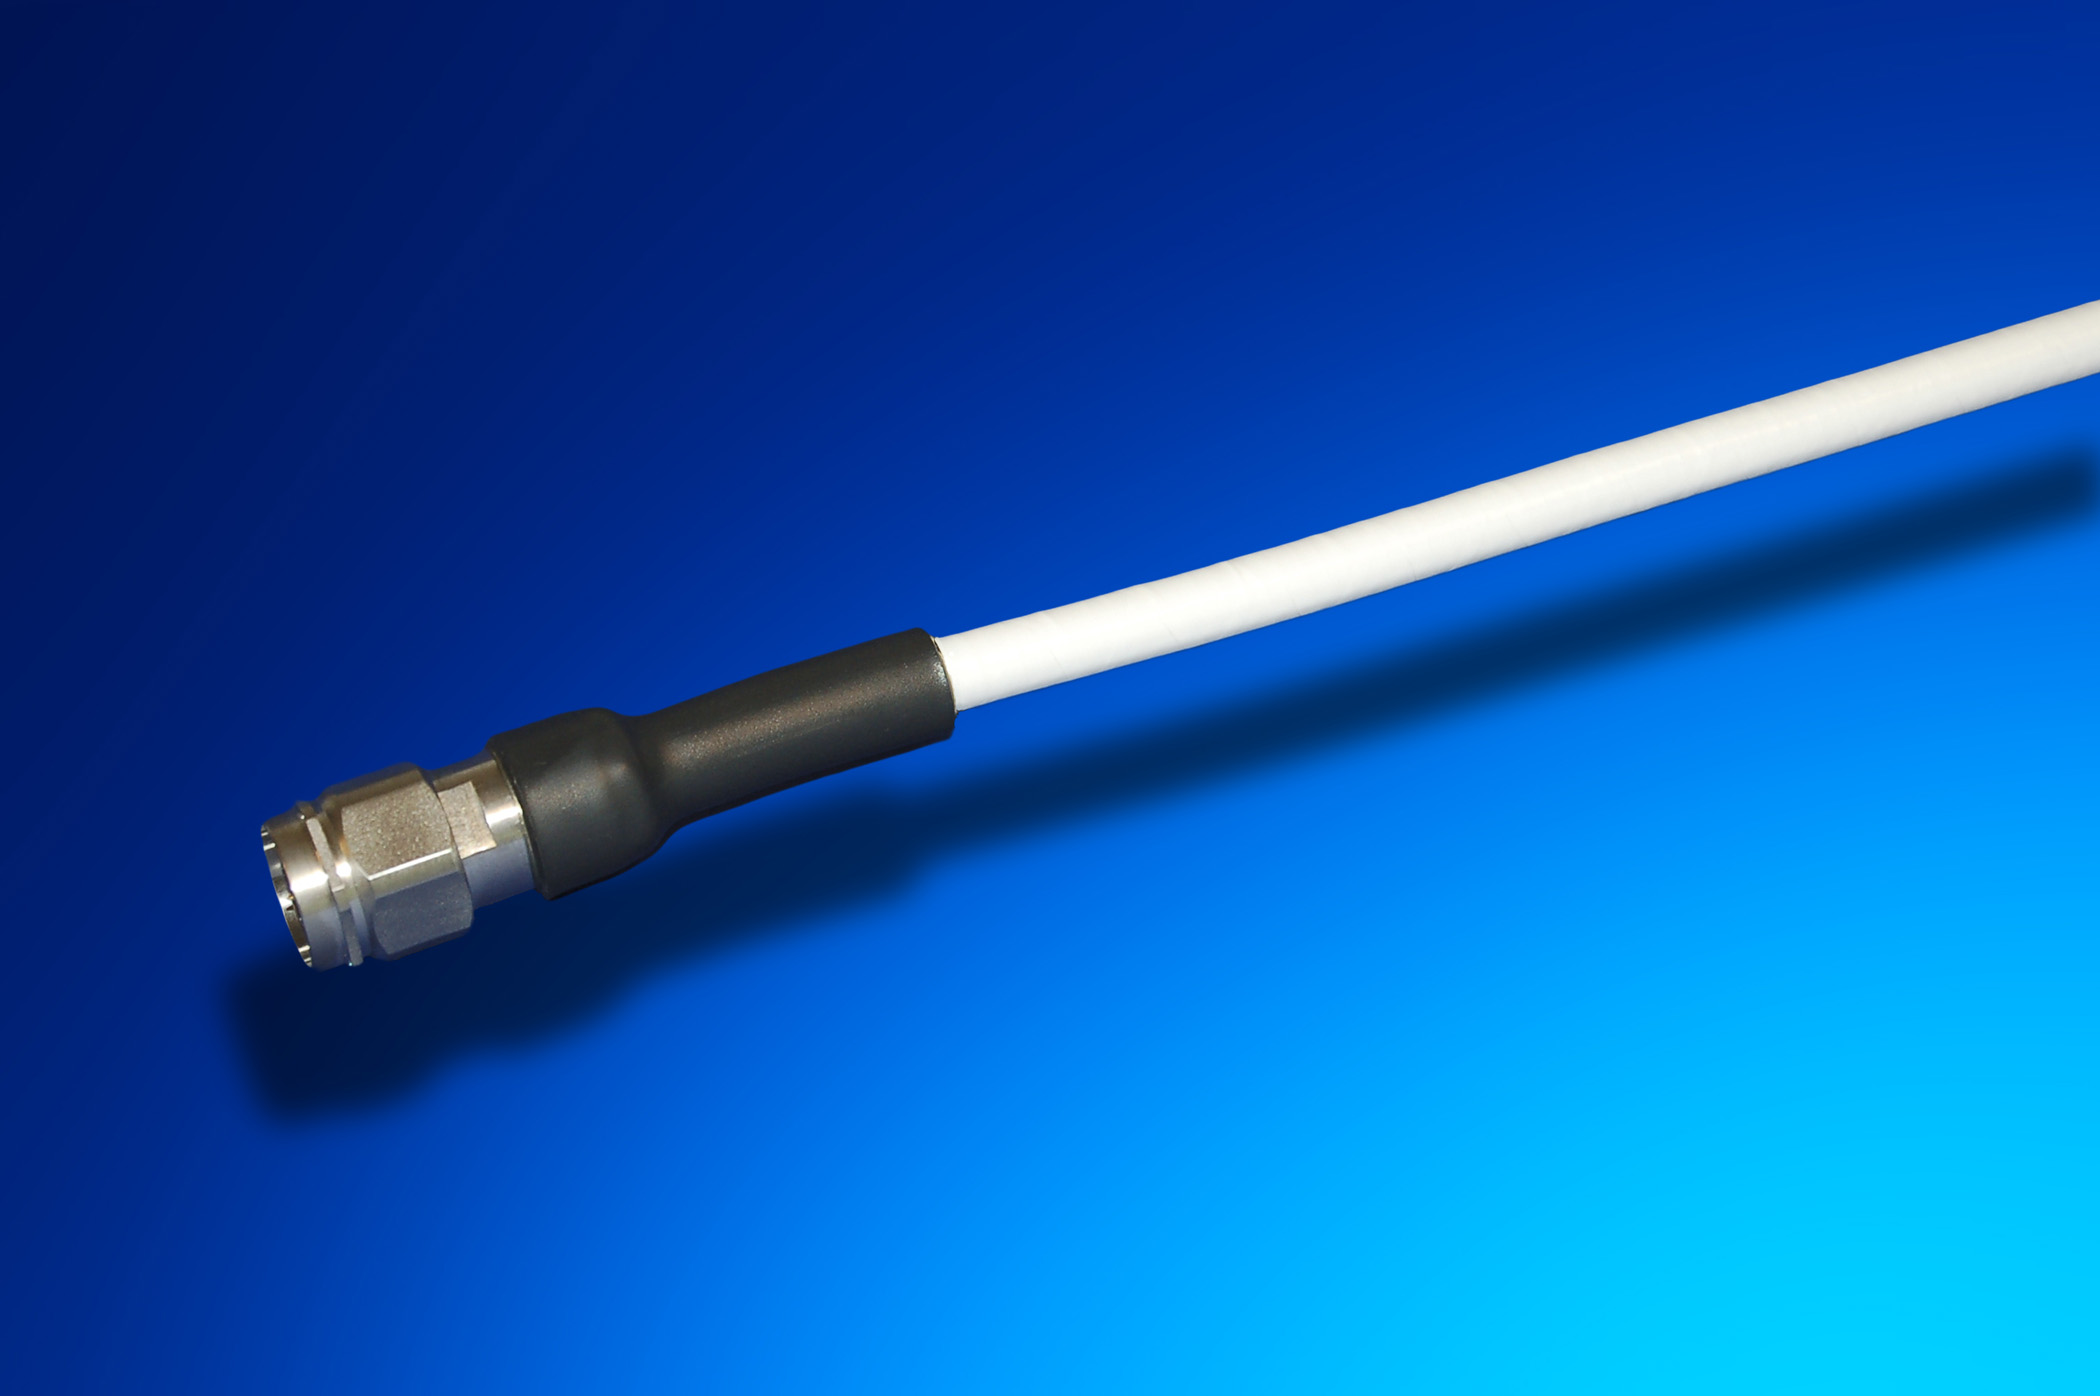 GORE Cable-Based Antennas improve in-flight wireless access